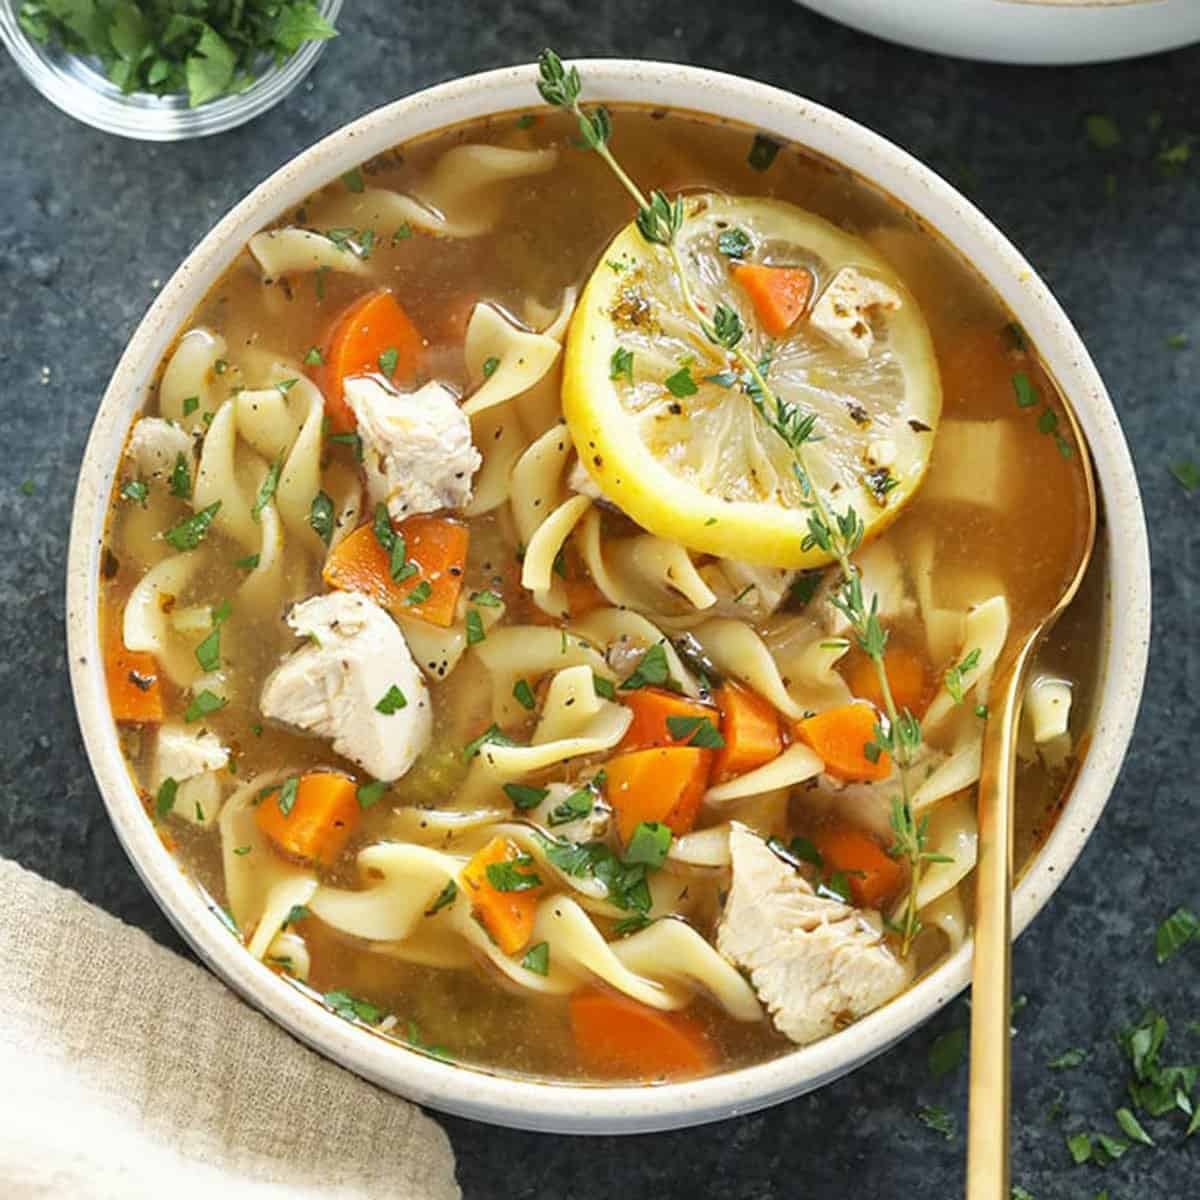 https://fitfoodiefinds.com/wp-content/uploads/2019/10/chicken-noodle.jpg